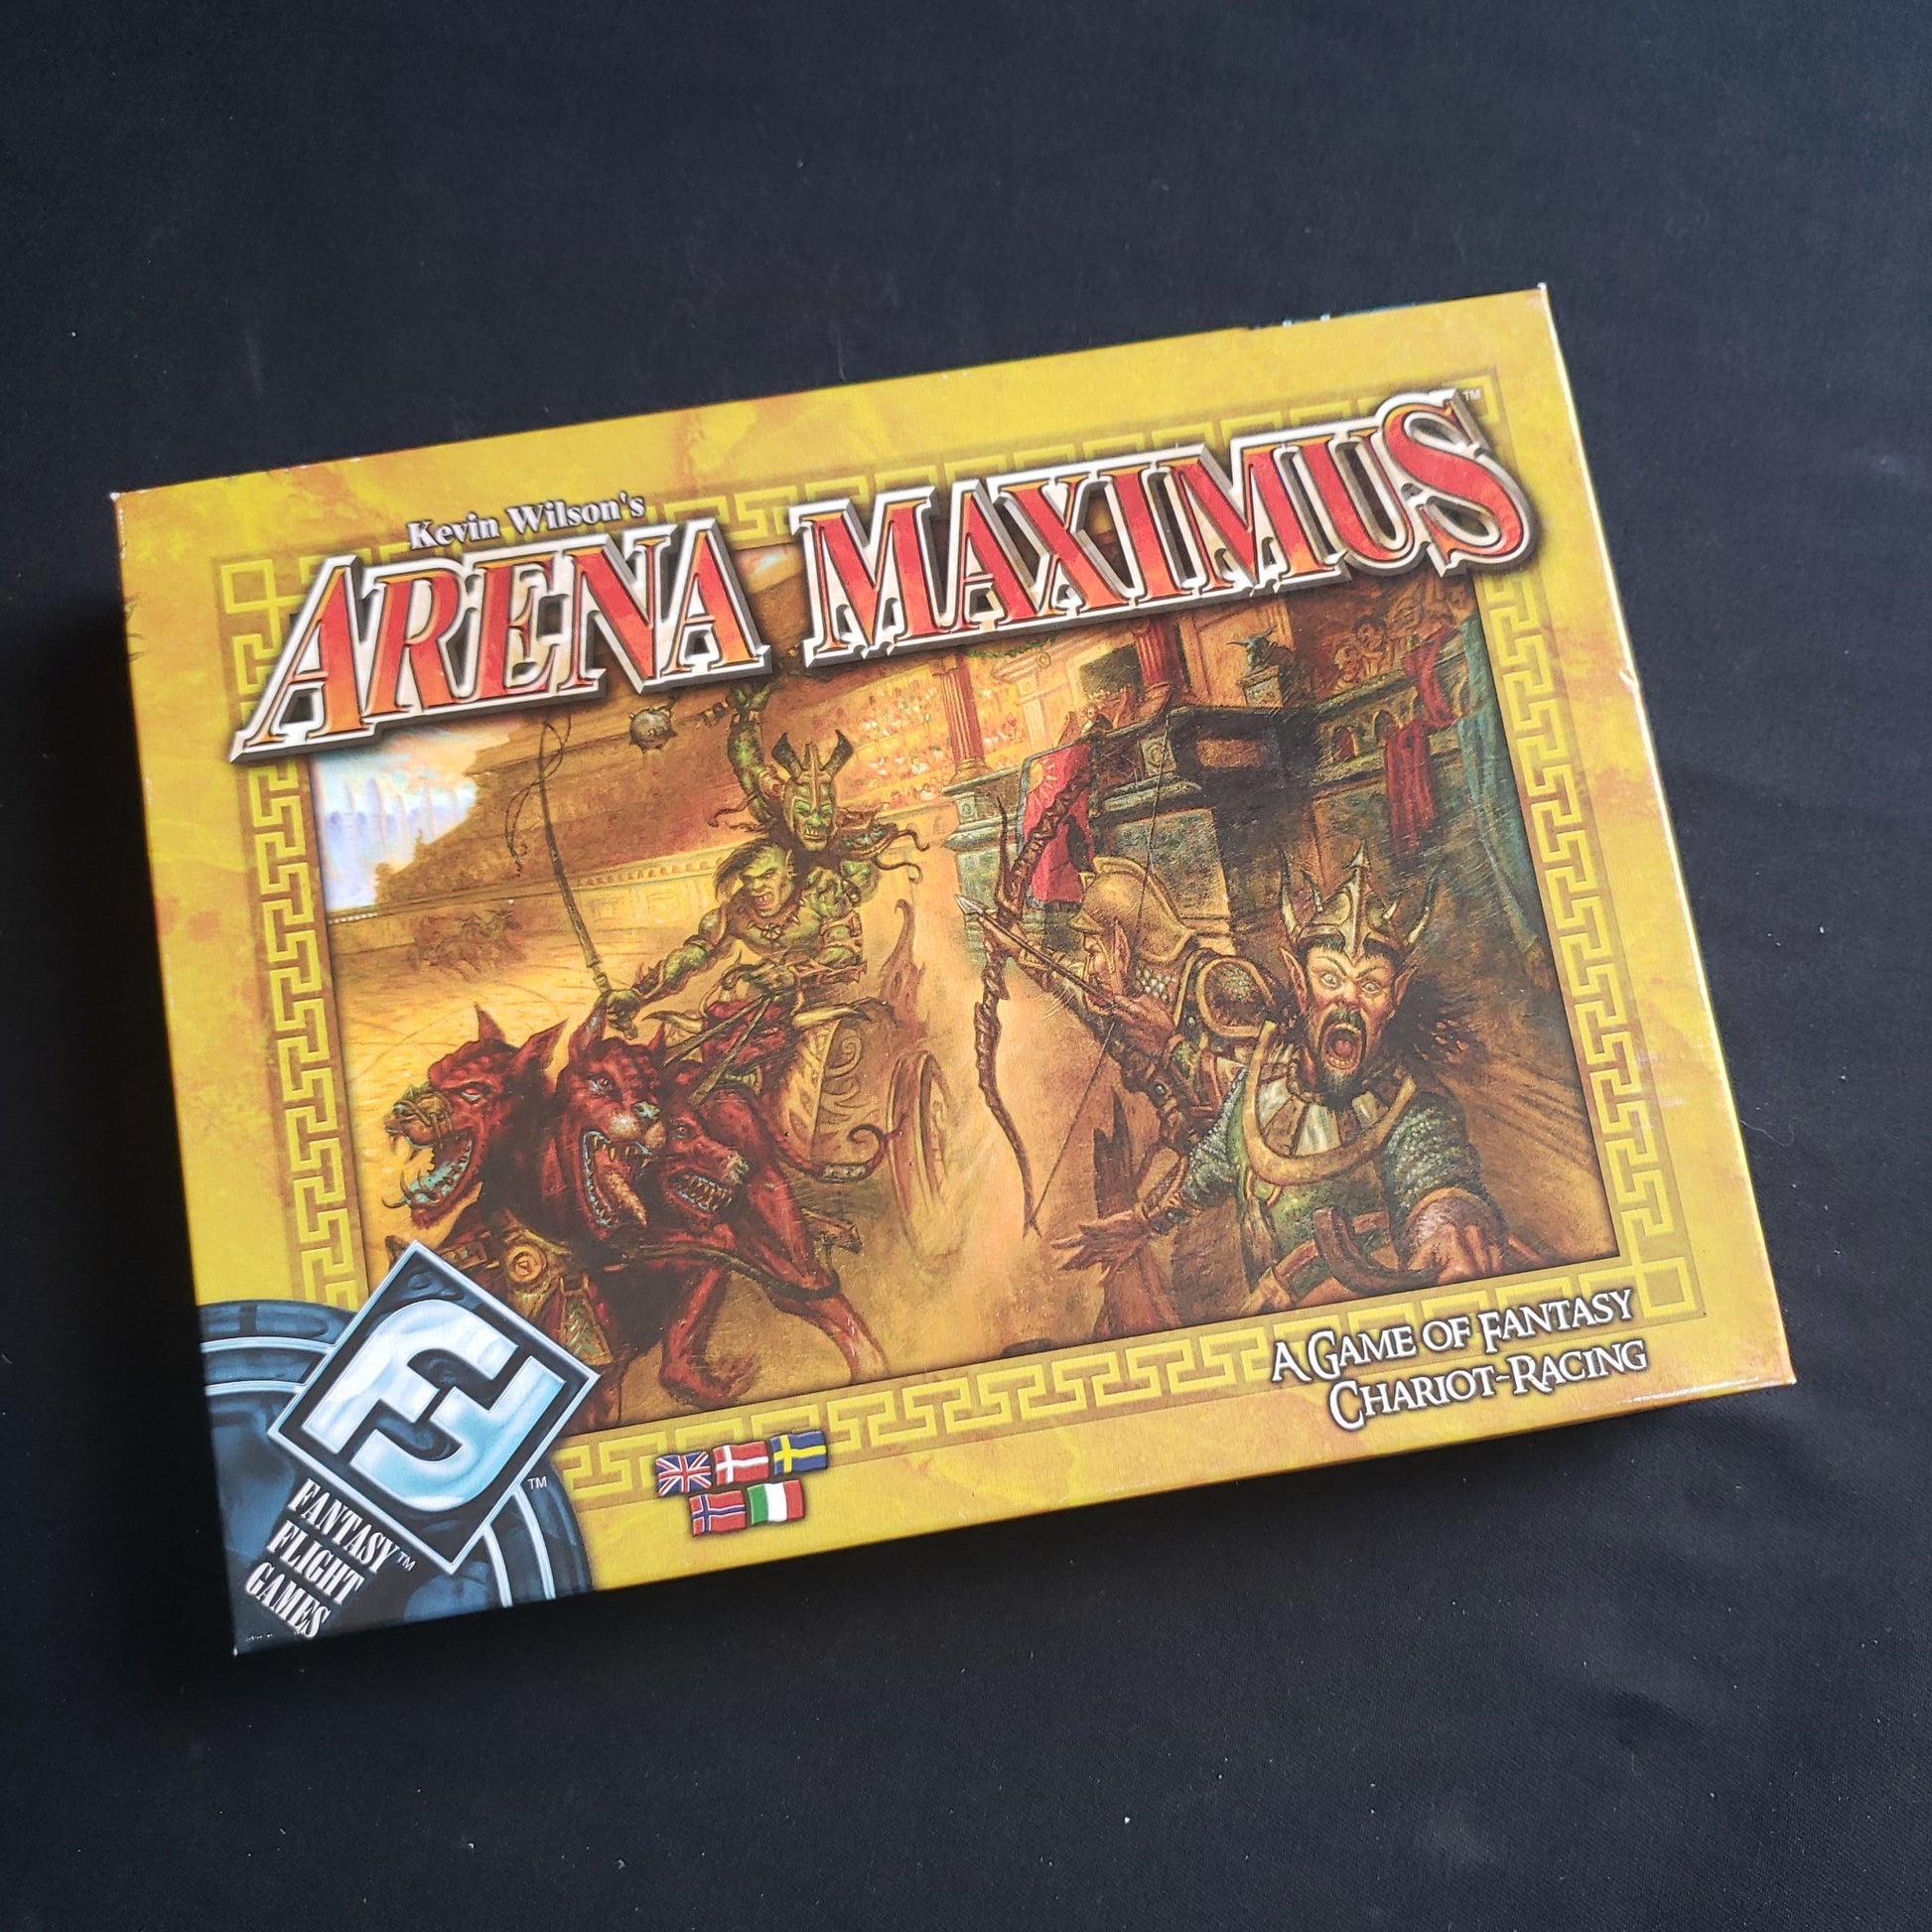 Image shows the front cover of the box of the Arena Maximus board game